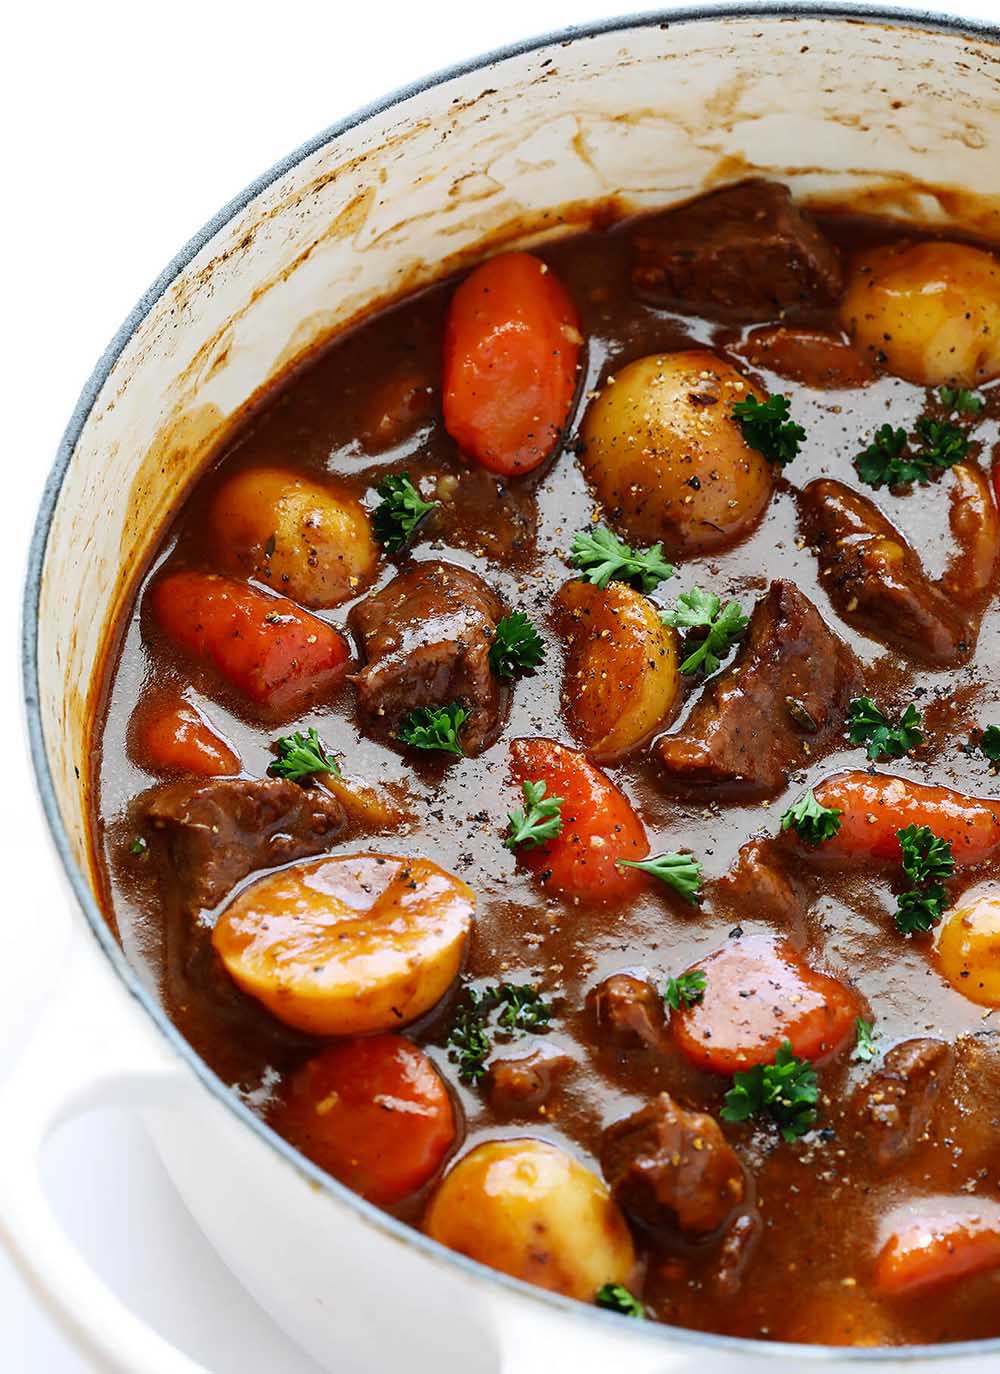 Beef stew, brownies, and bread: Taste all these Guinness recipes today ...